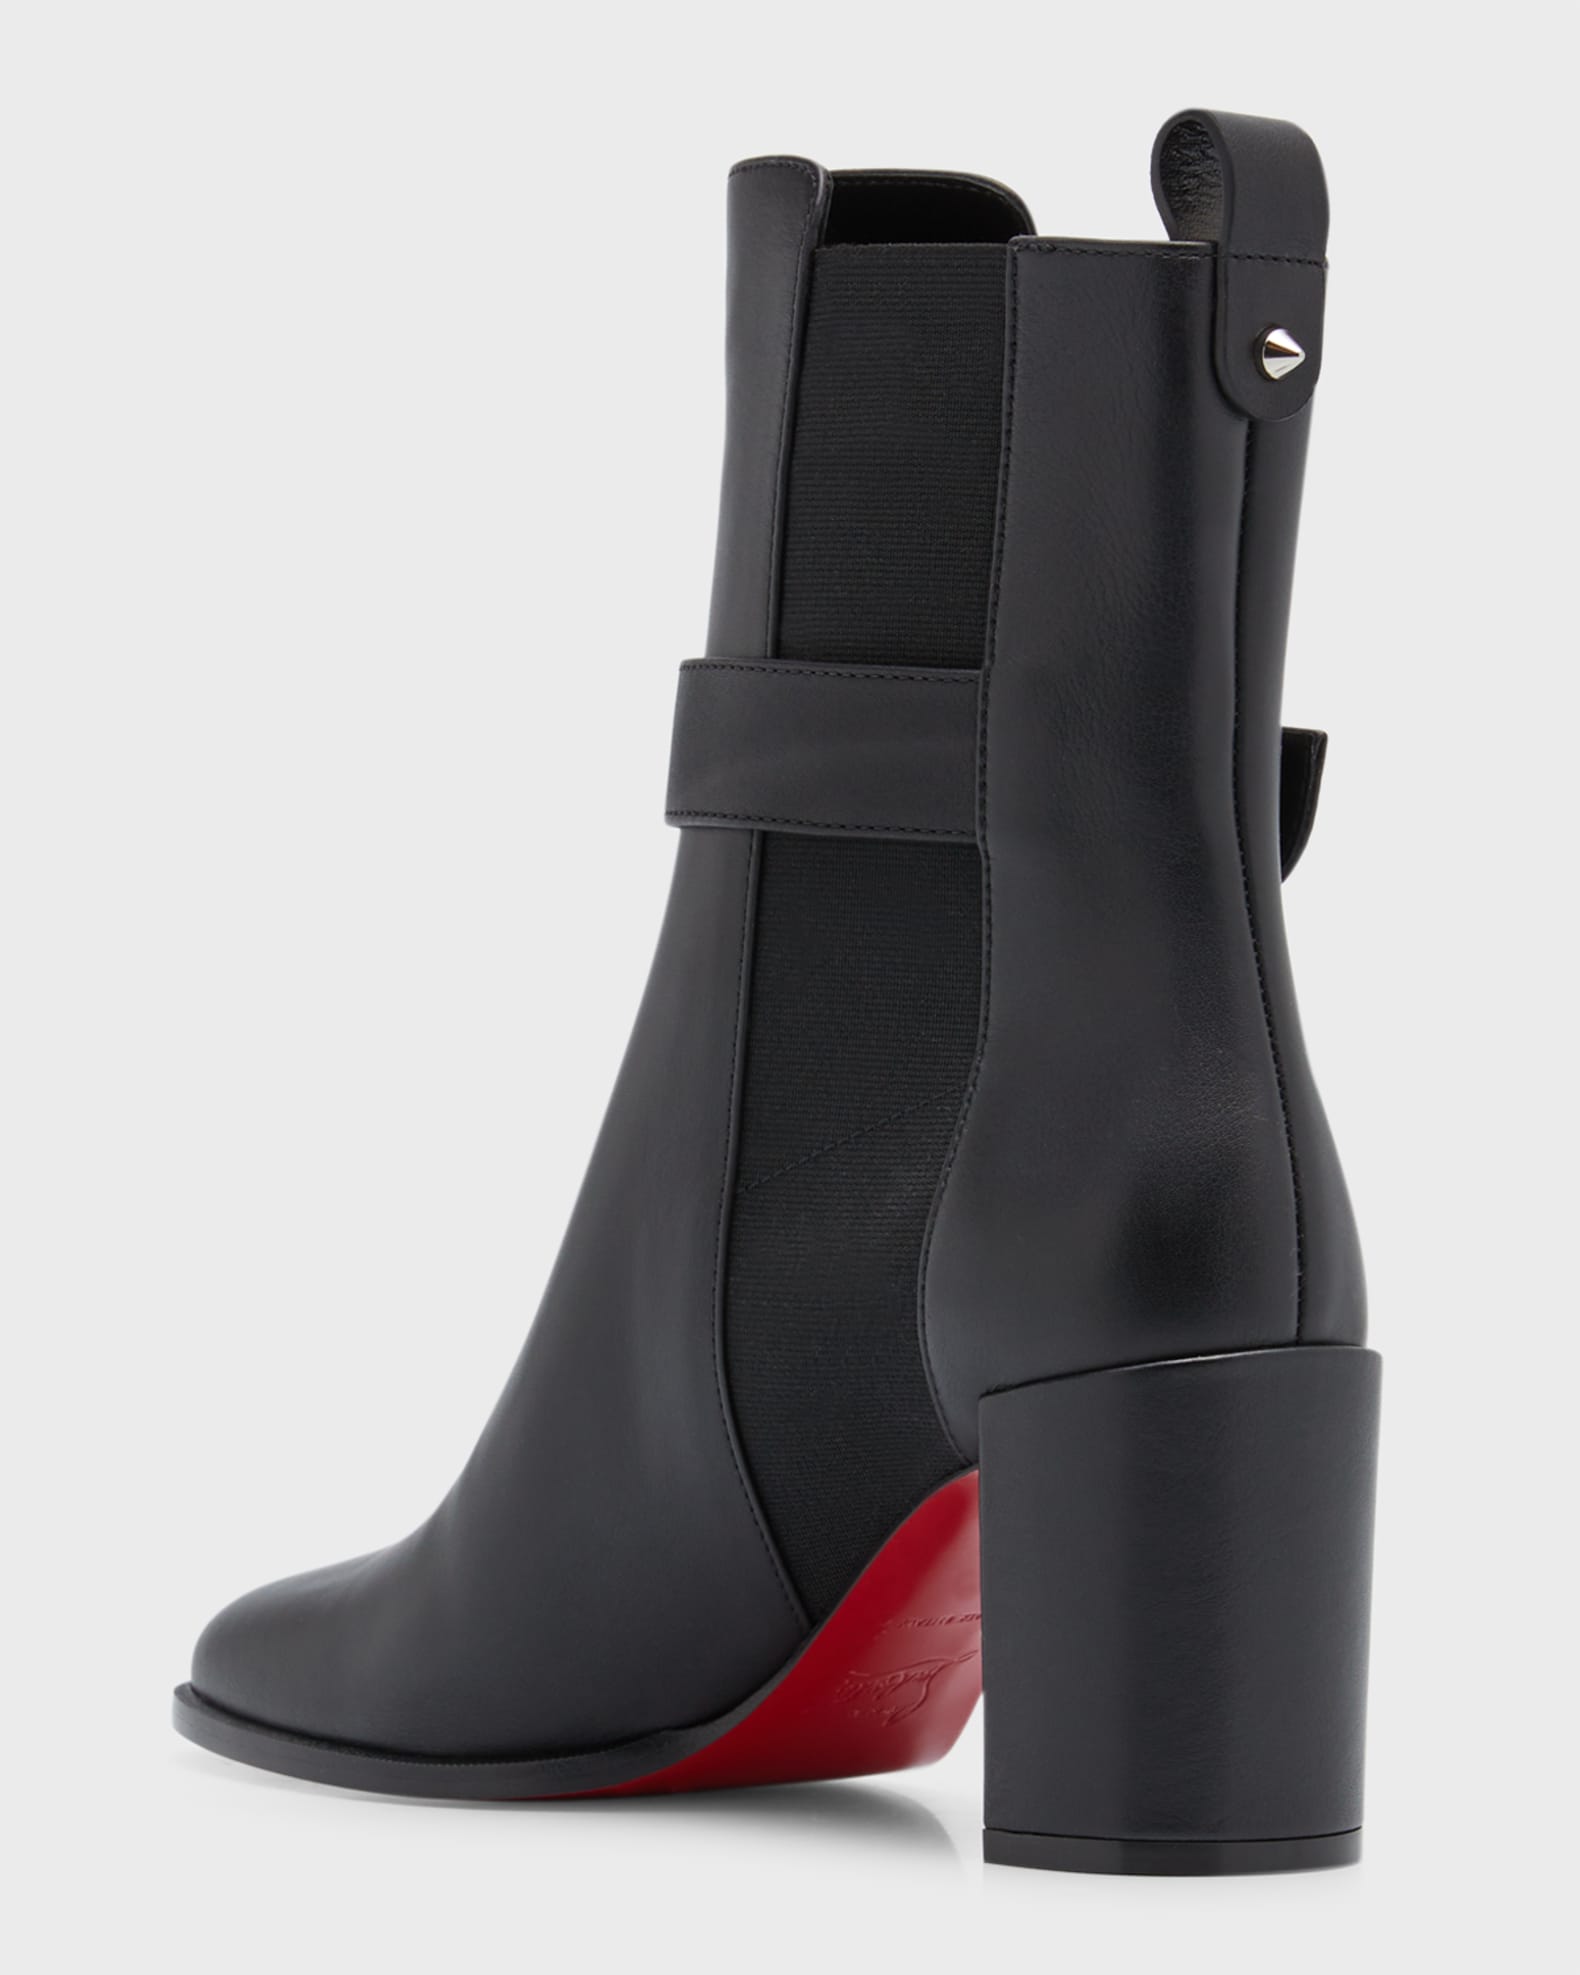 Christian Louboutin Leather Buckle Red Sole Booties | Neiman Marcus